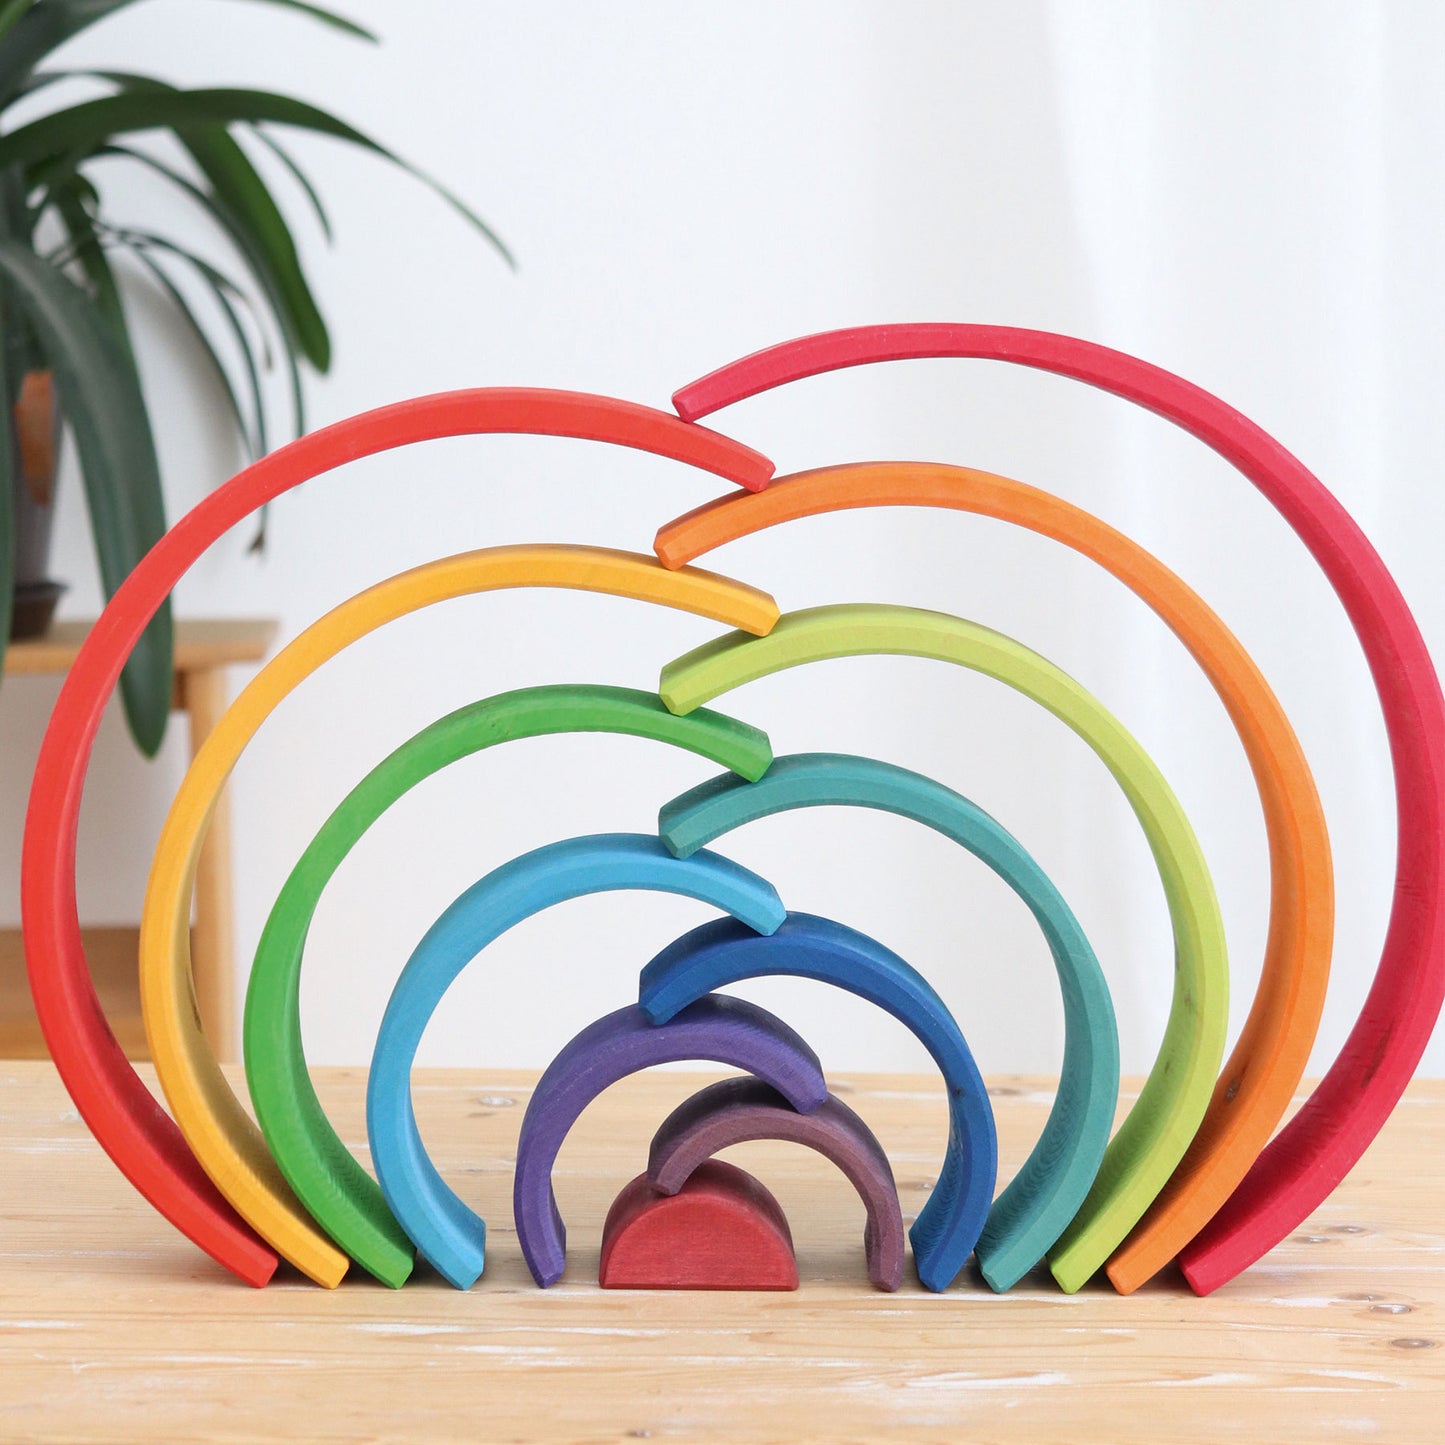 Grimm's Large Stacking Rainbow (12 pieces)